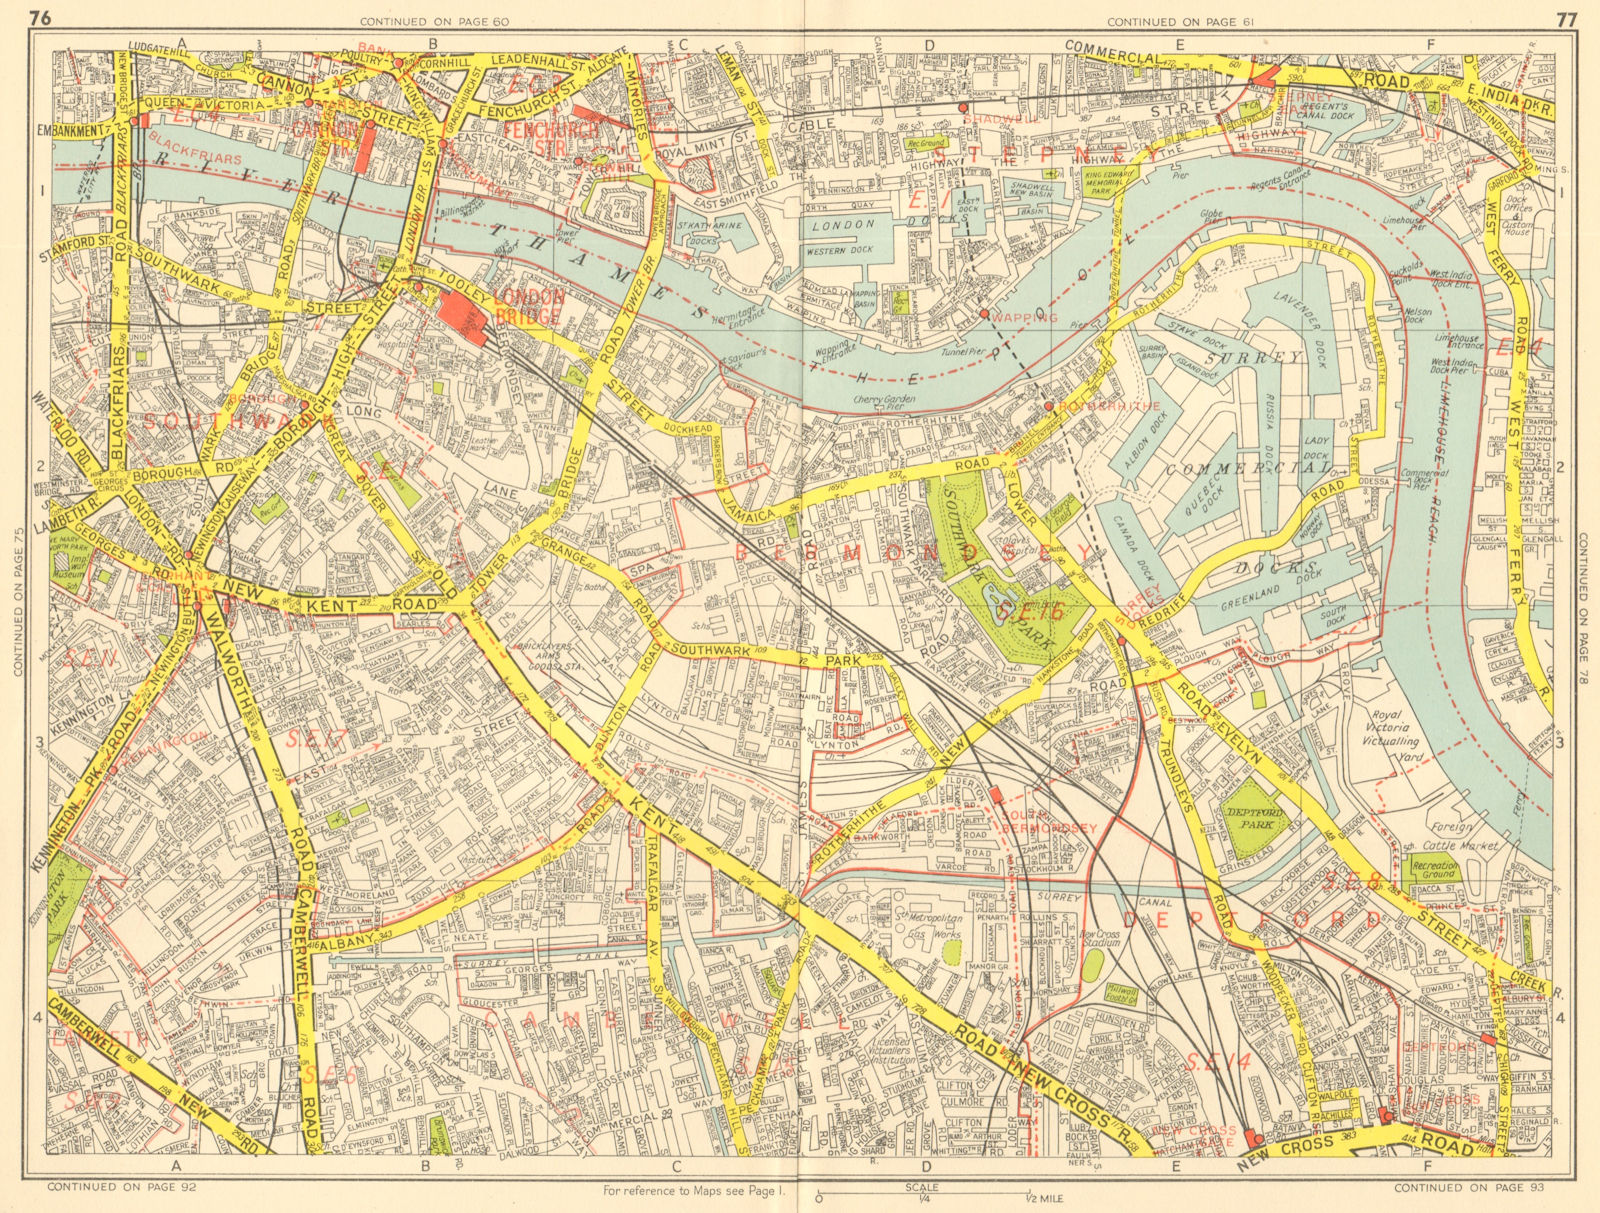 SOUTHWARK Bermondsey Wapping Rotherhithe Camberwell. GEOGRAPHERS' A-Z 1959 map